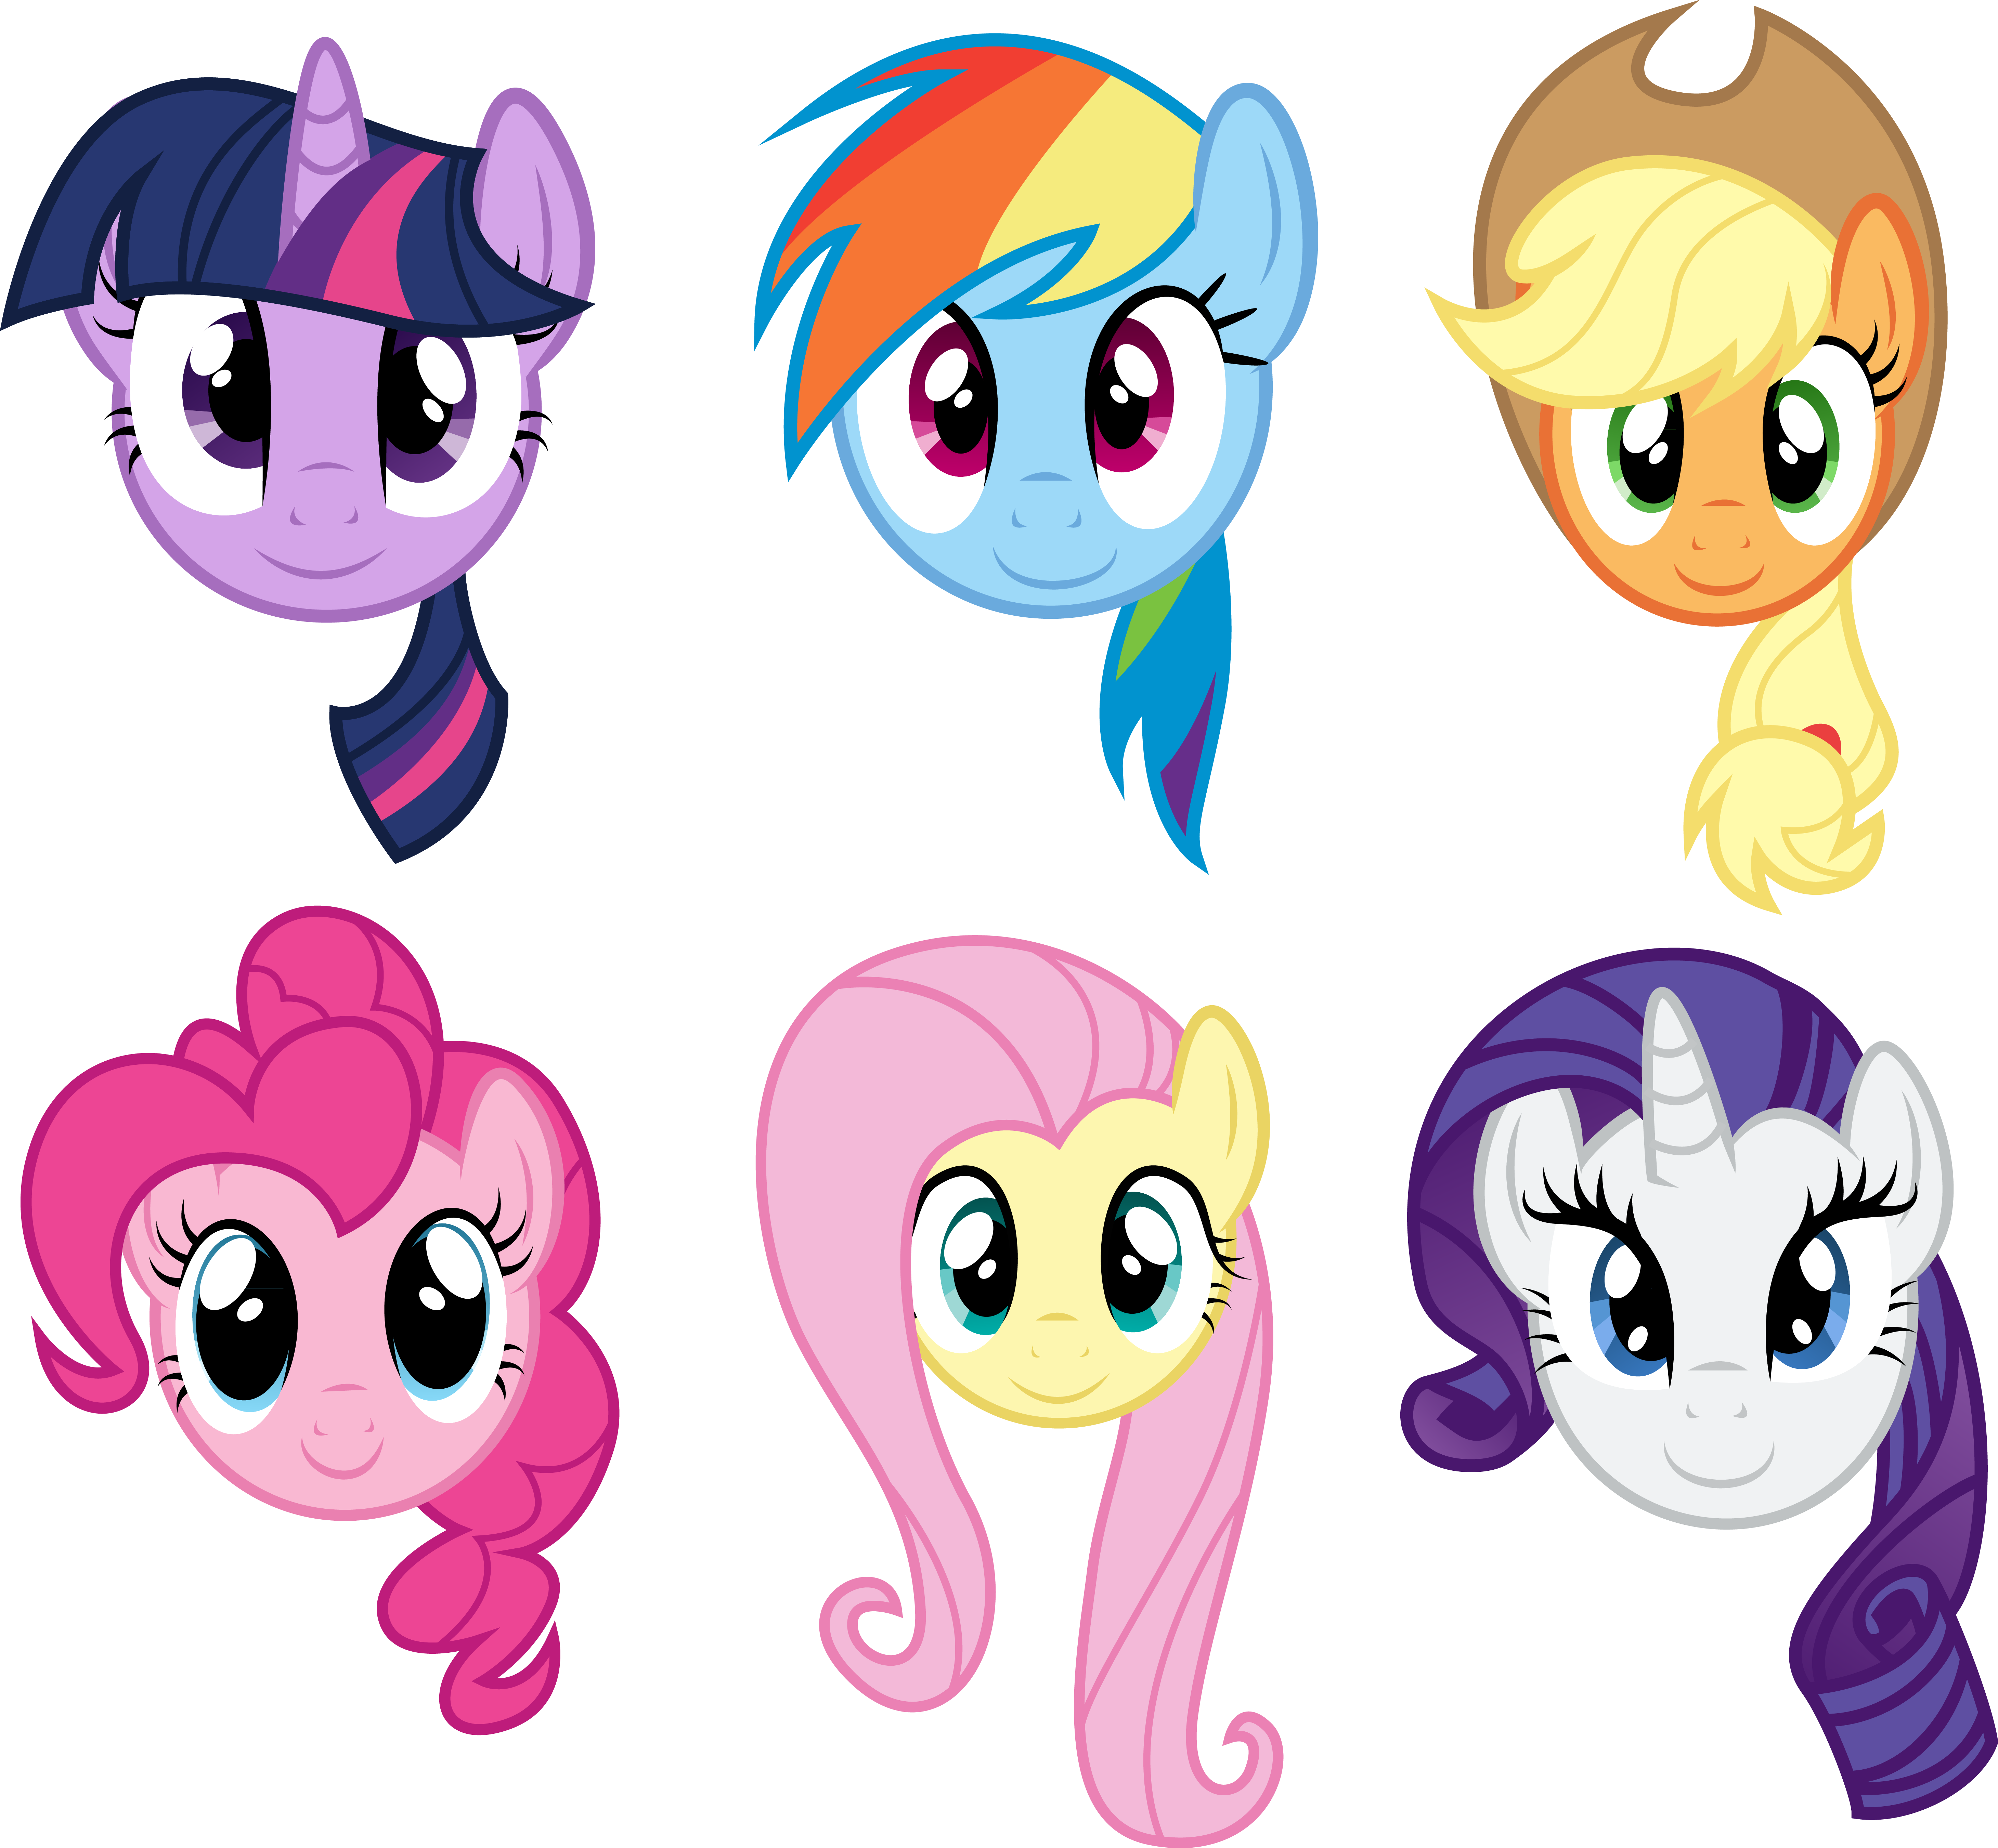 Main Six Faces by PaulySentry on DeviantArt